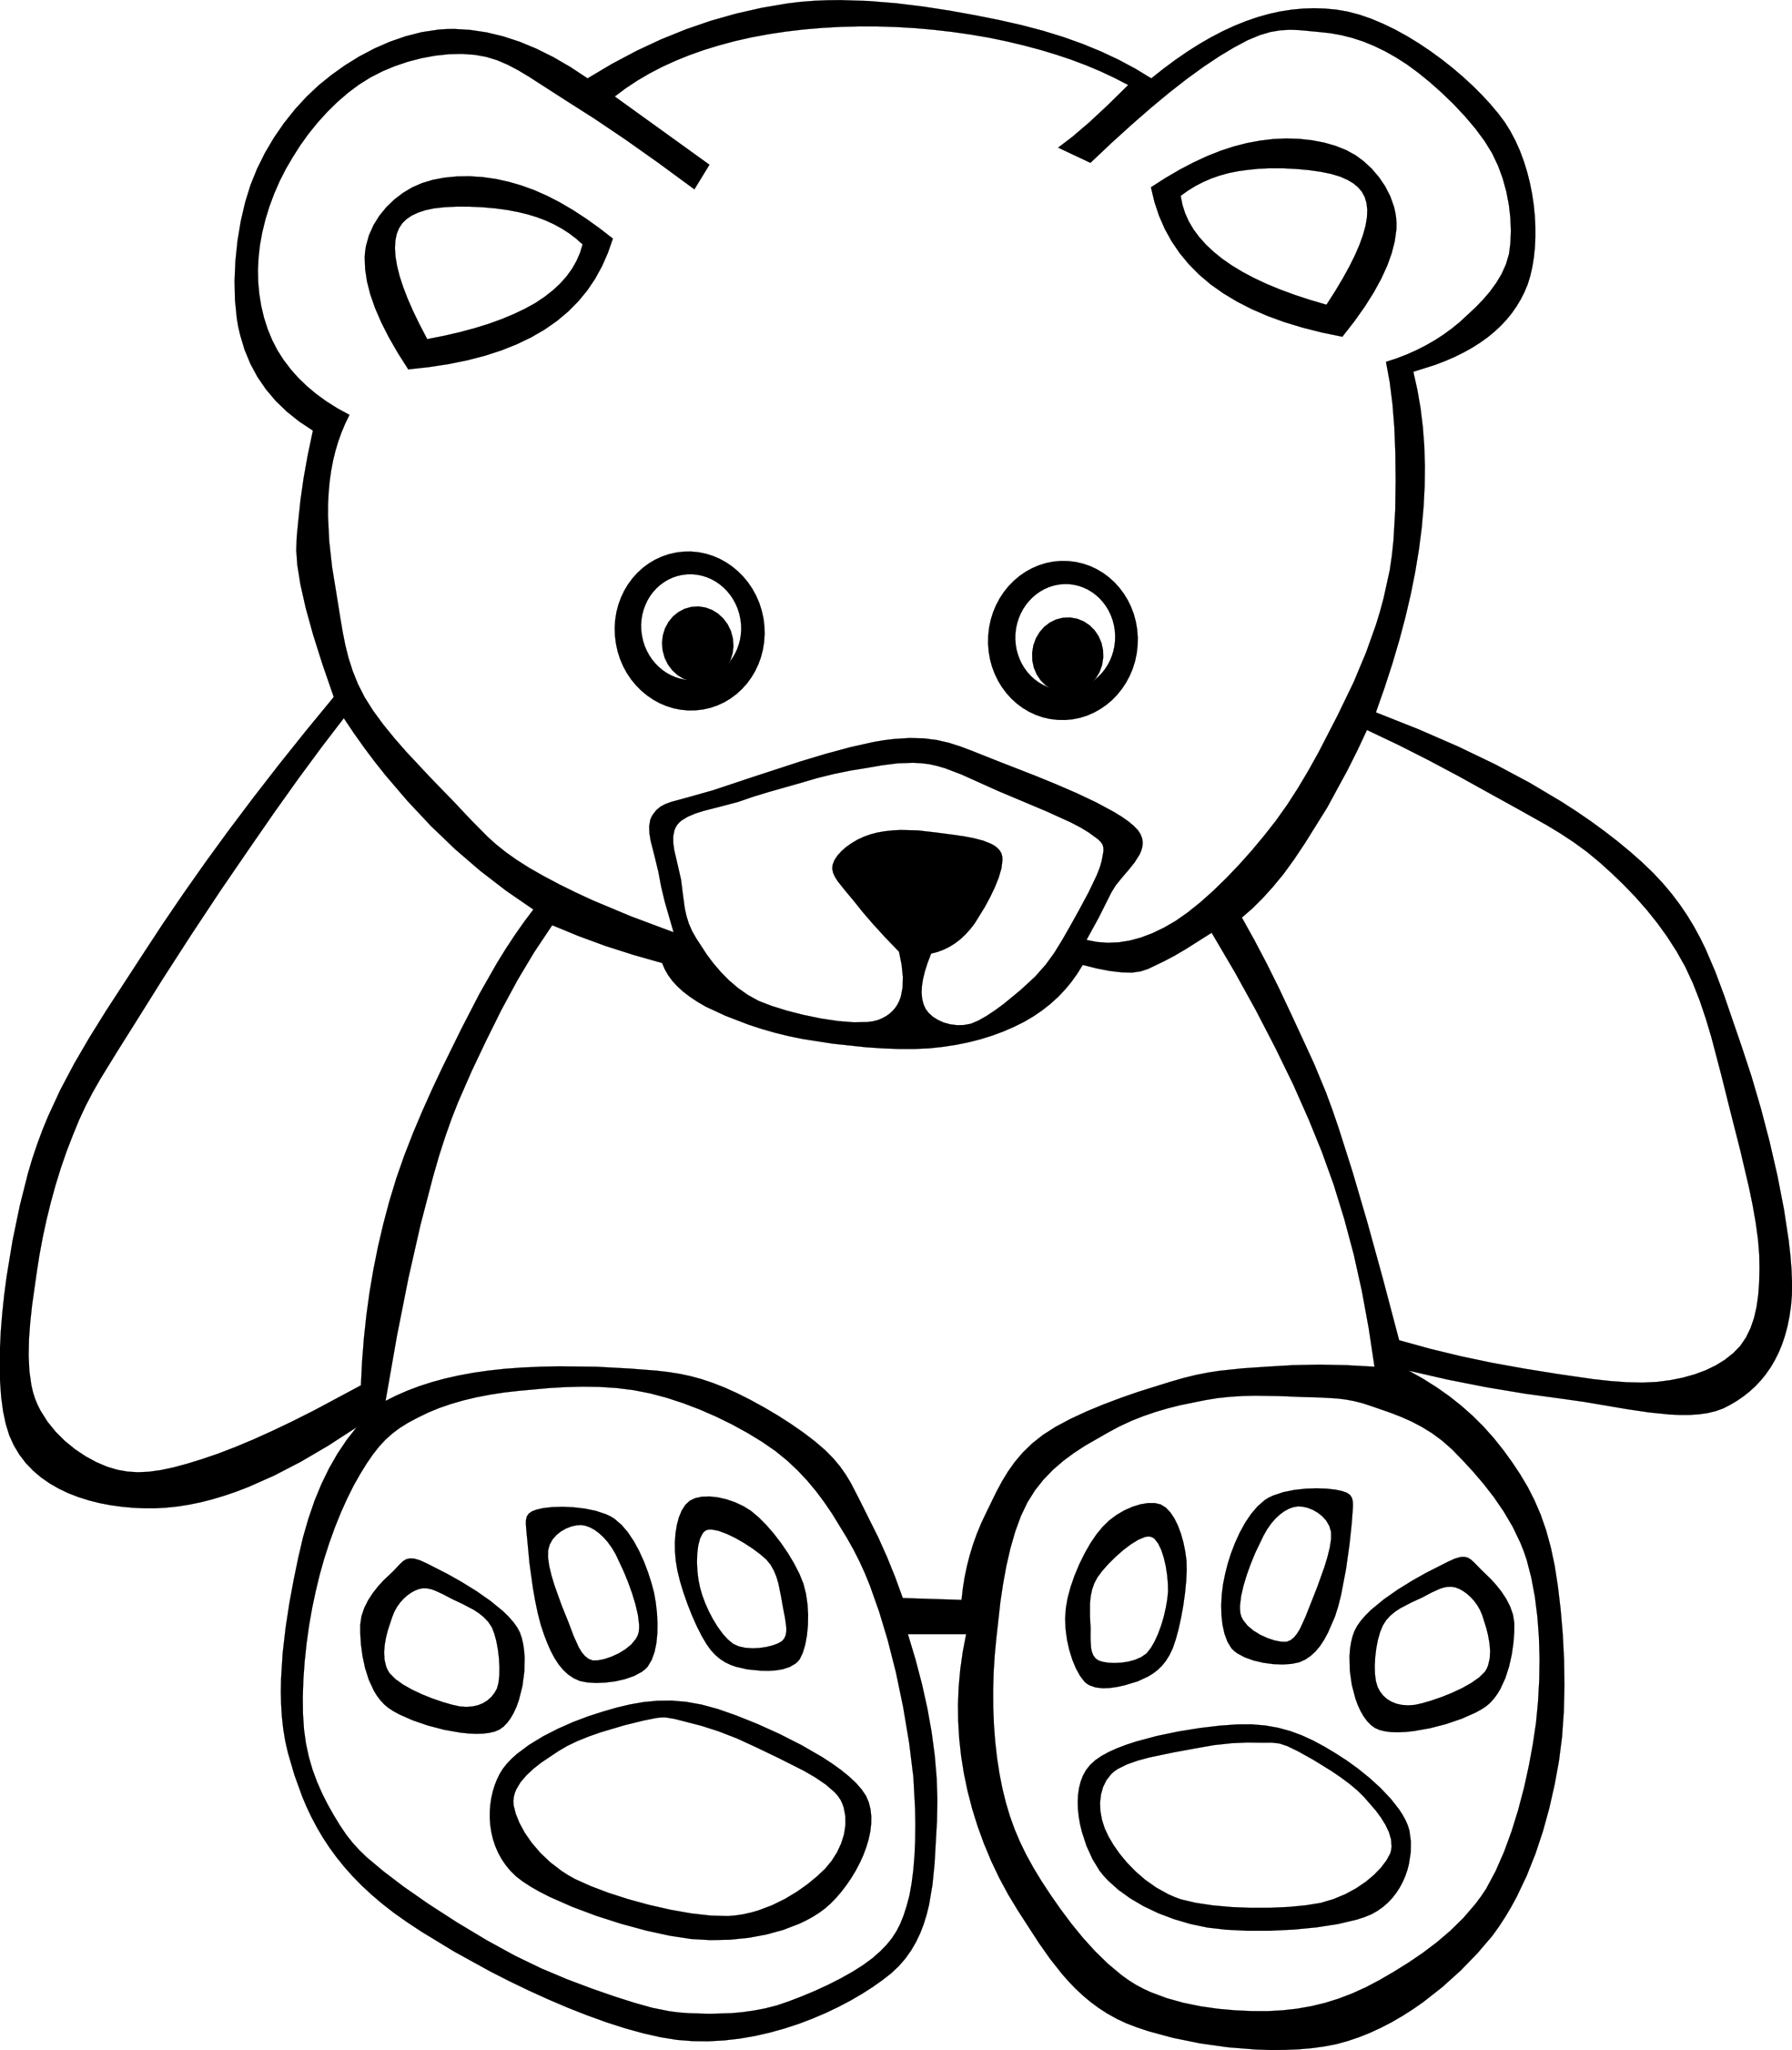 How To Draw A Teddy - ClipArt Best